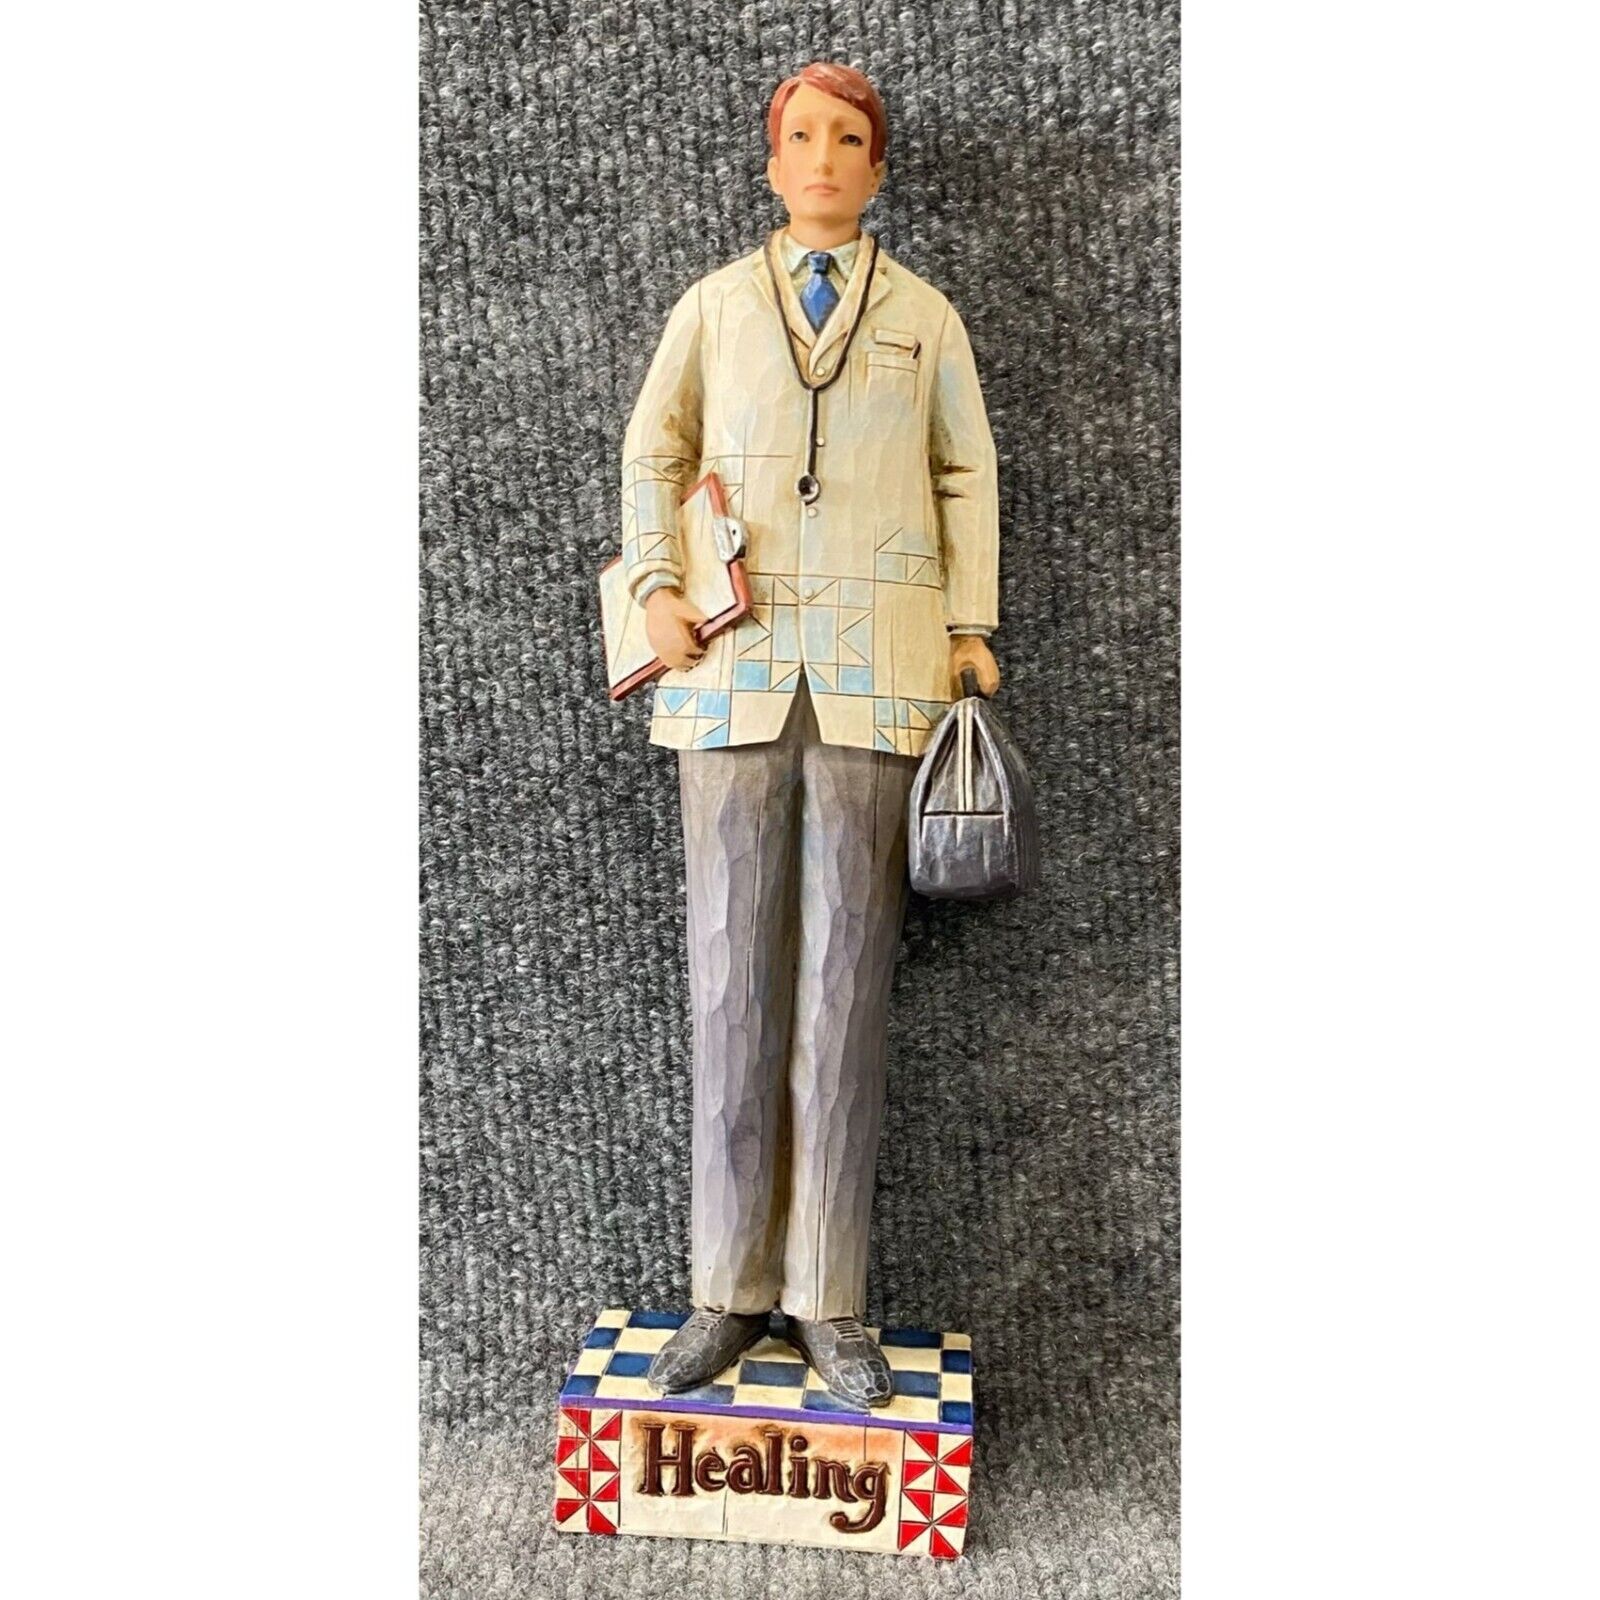 Vintage Doctor Figurine Collectable